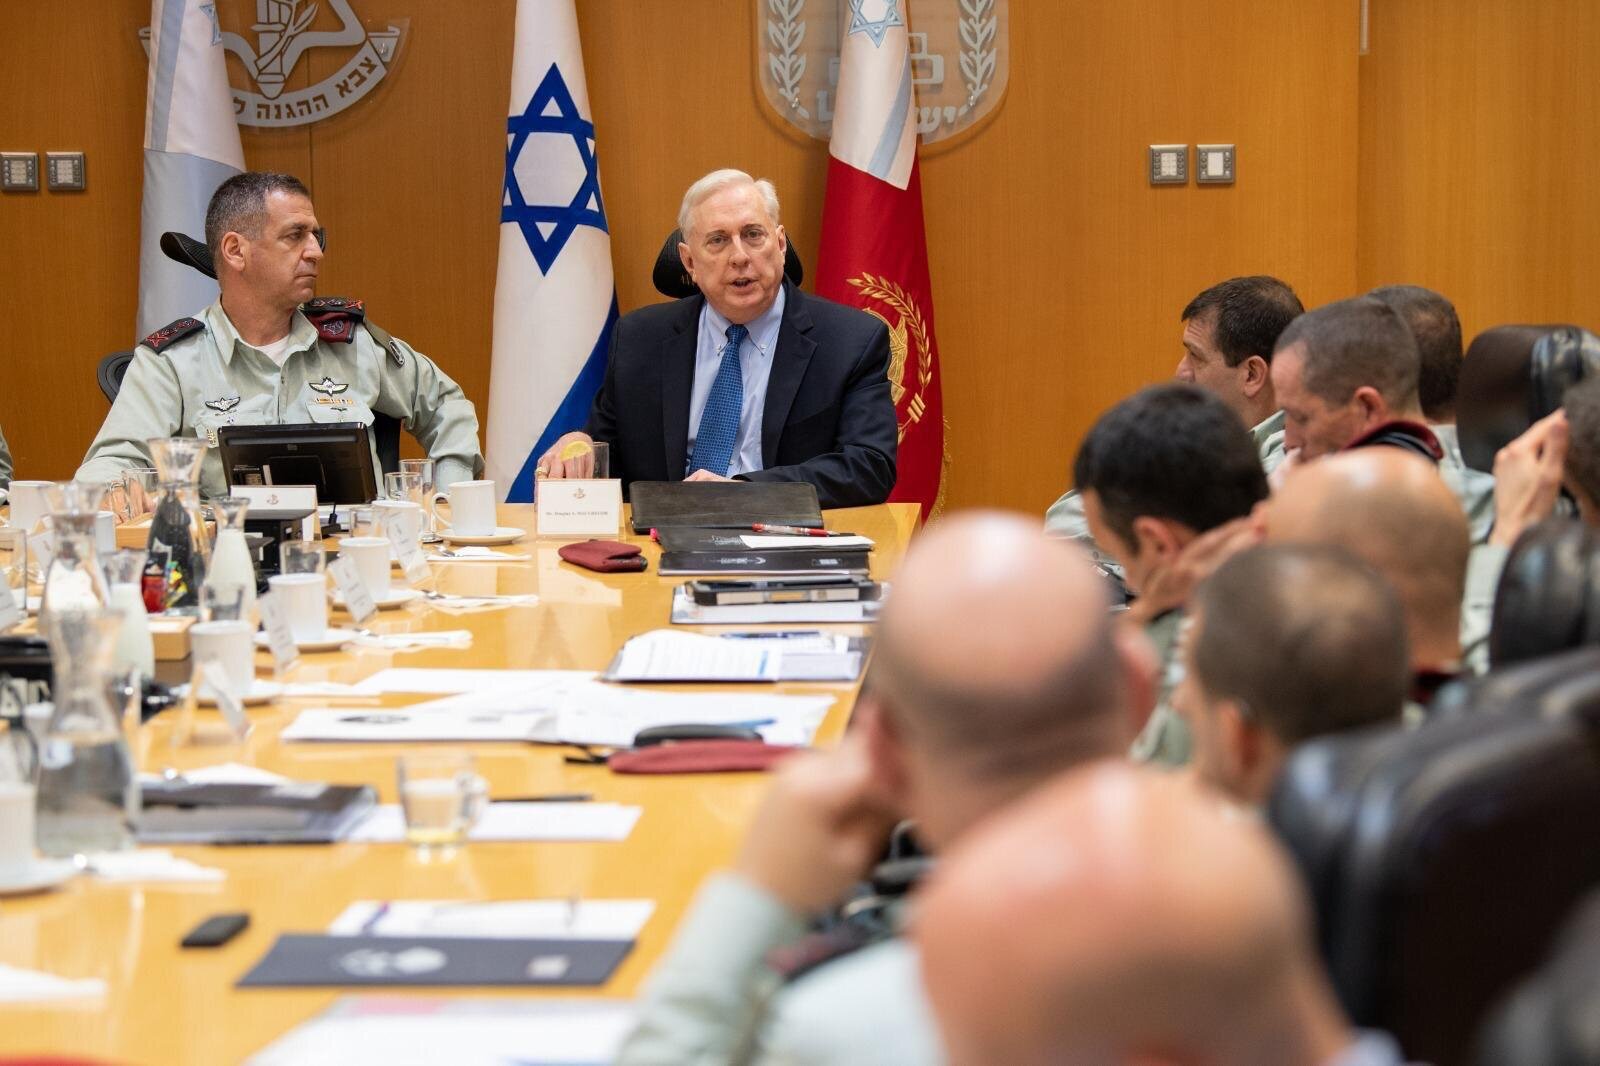 PICTURED: Retired Army Colonel Douglas Macgregor meeting with IDF Chief of the General Staff Lieutenant General Aviv Kochavi. CC 4.0.